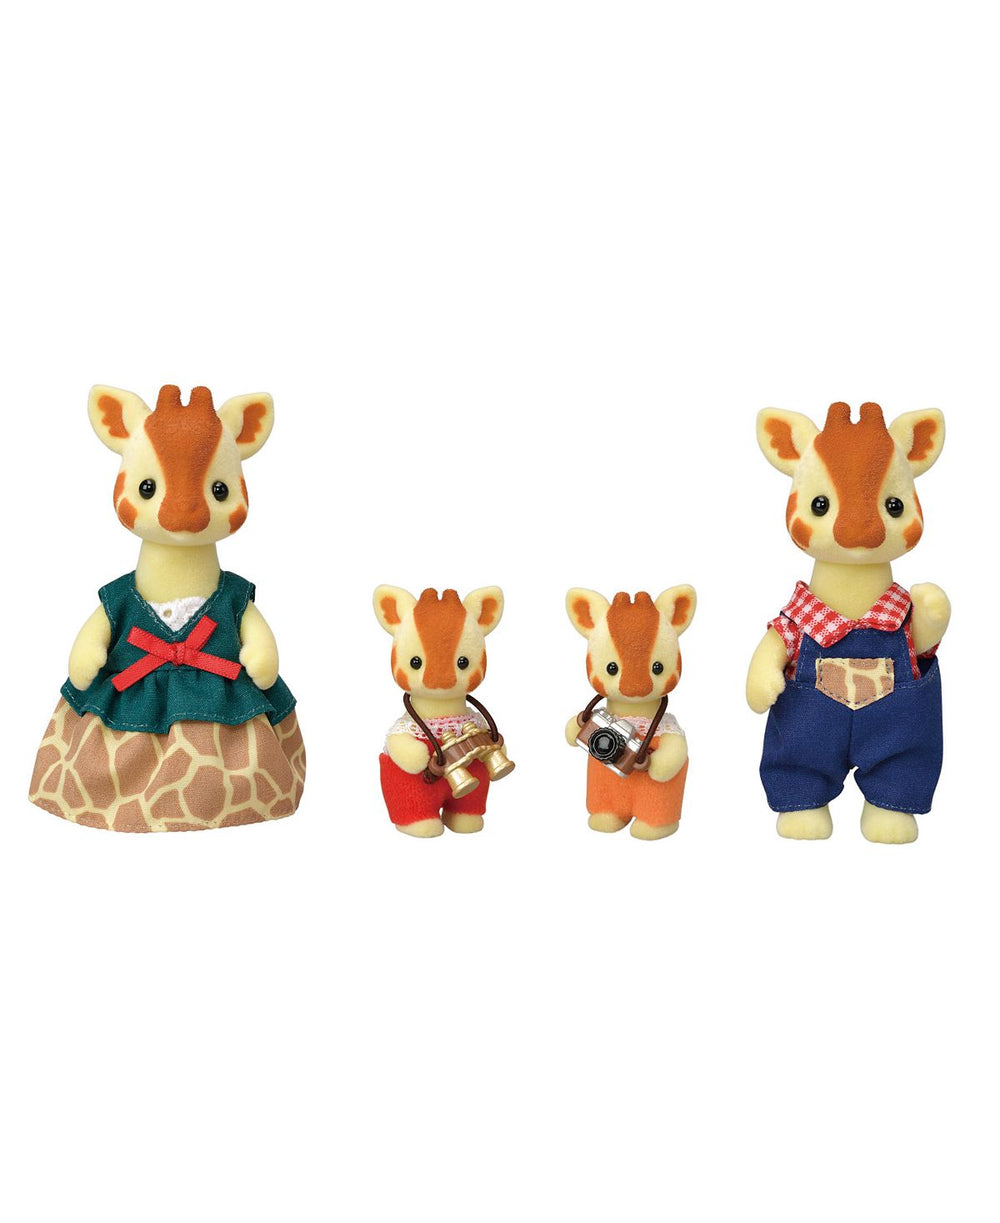 Calico Critters Highbranch Giraffe Family - Collectable Doll Figures Set of 4